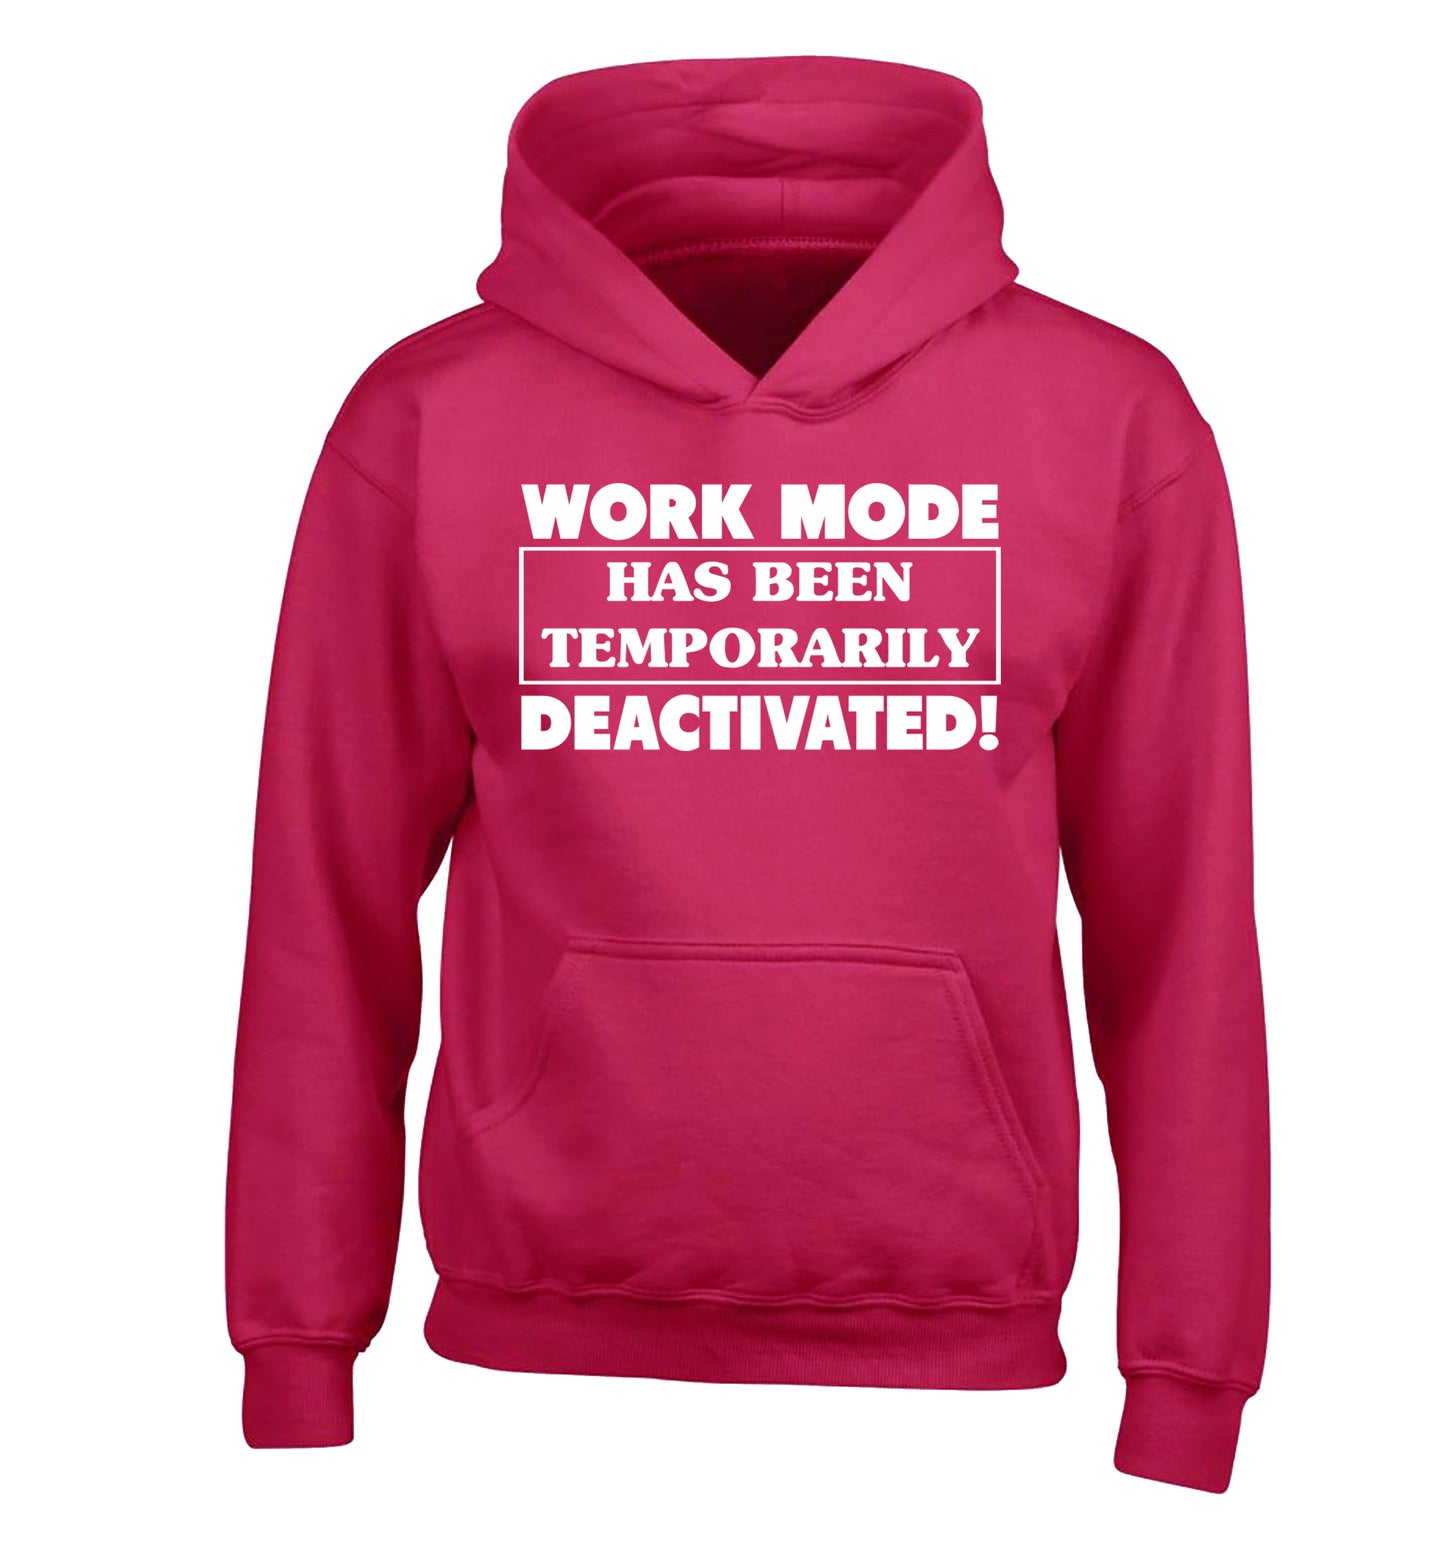 Work mode has now been temporarily deactivated children's pink hoodie 12-13 Years